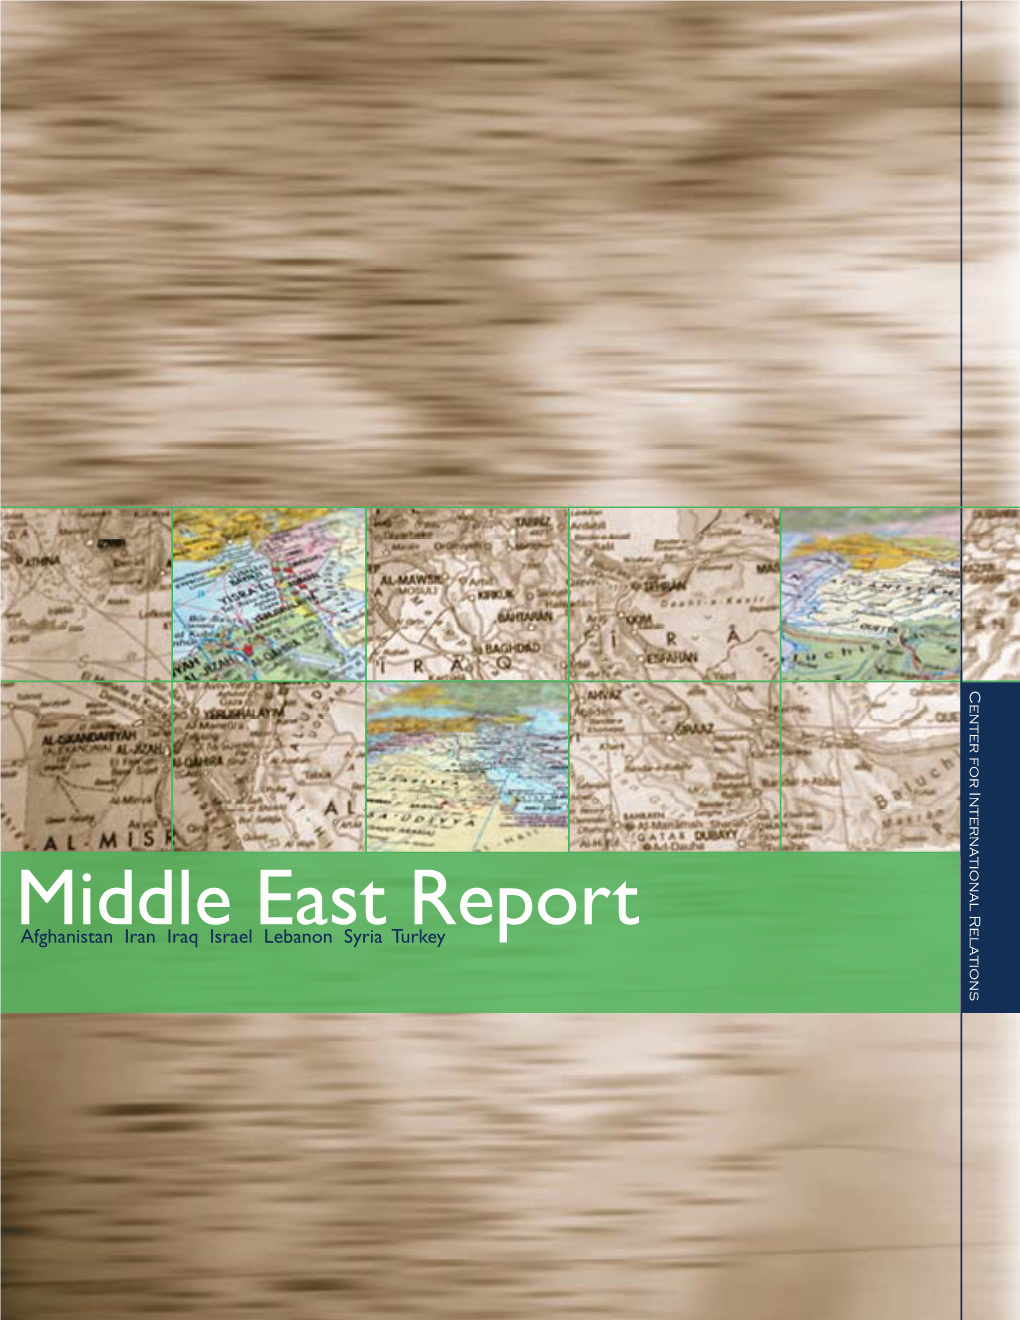 Middle East Report.Indd